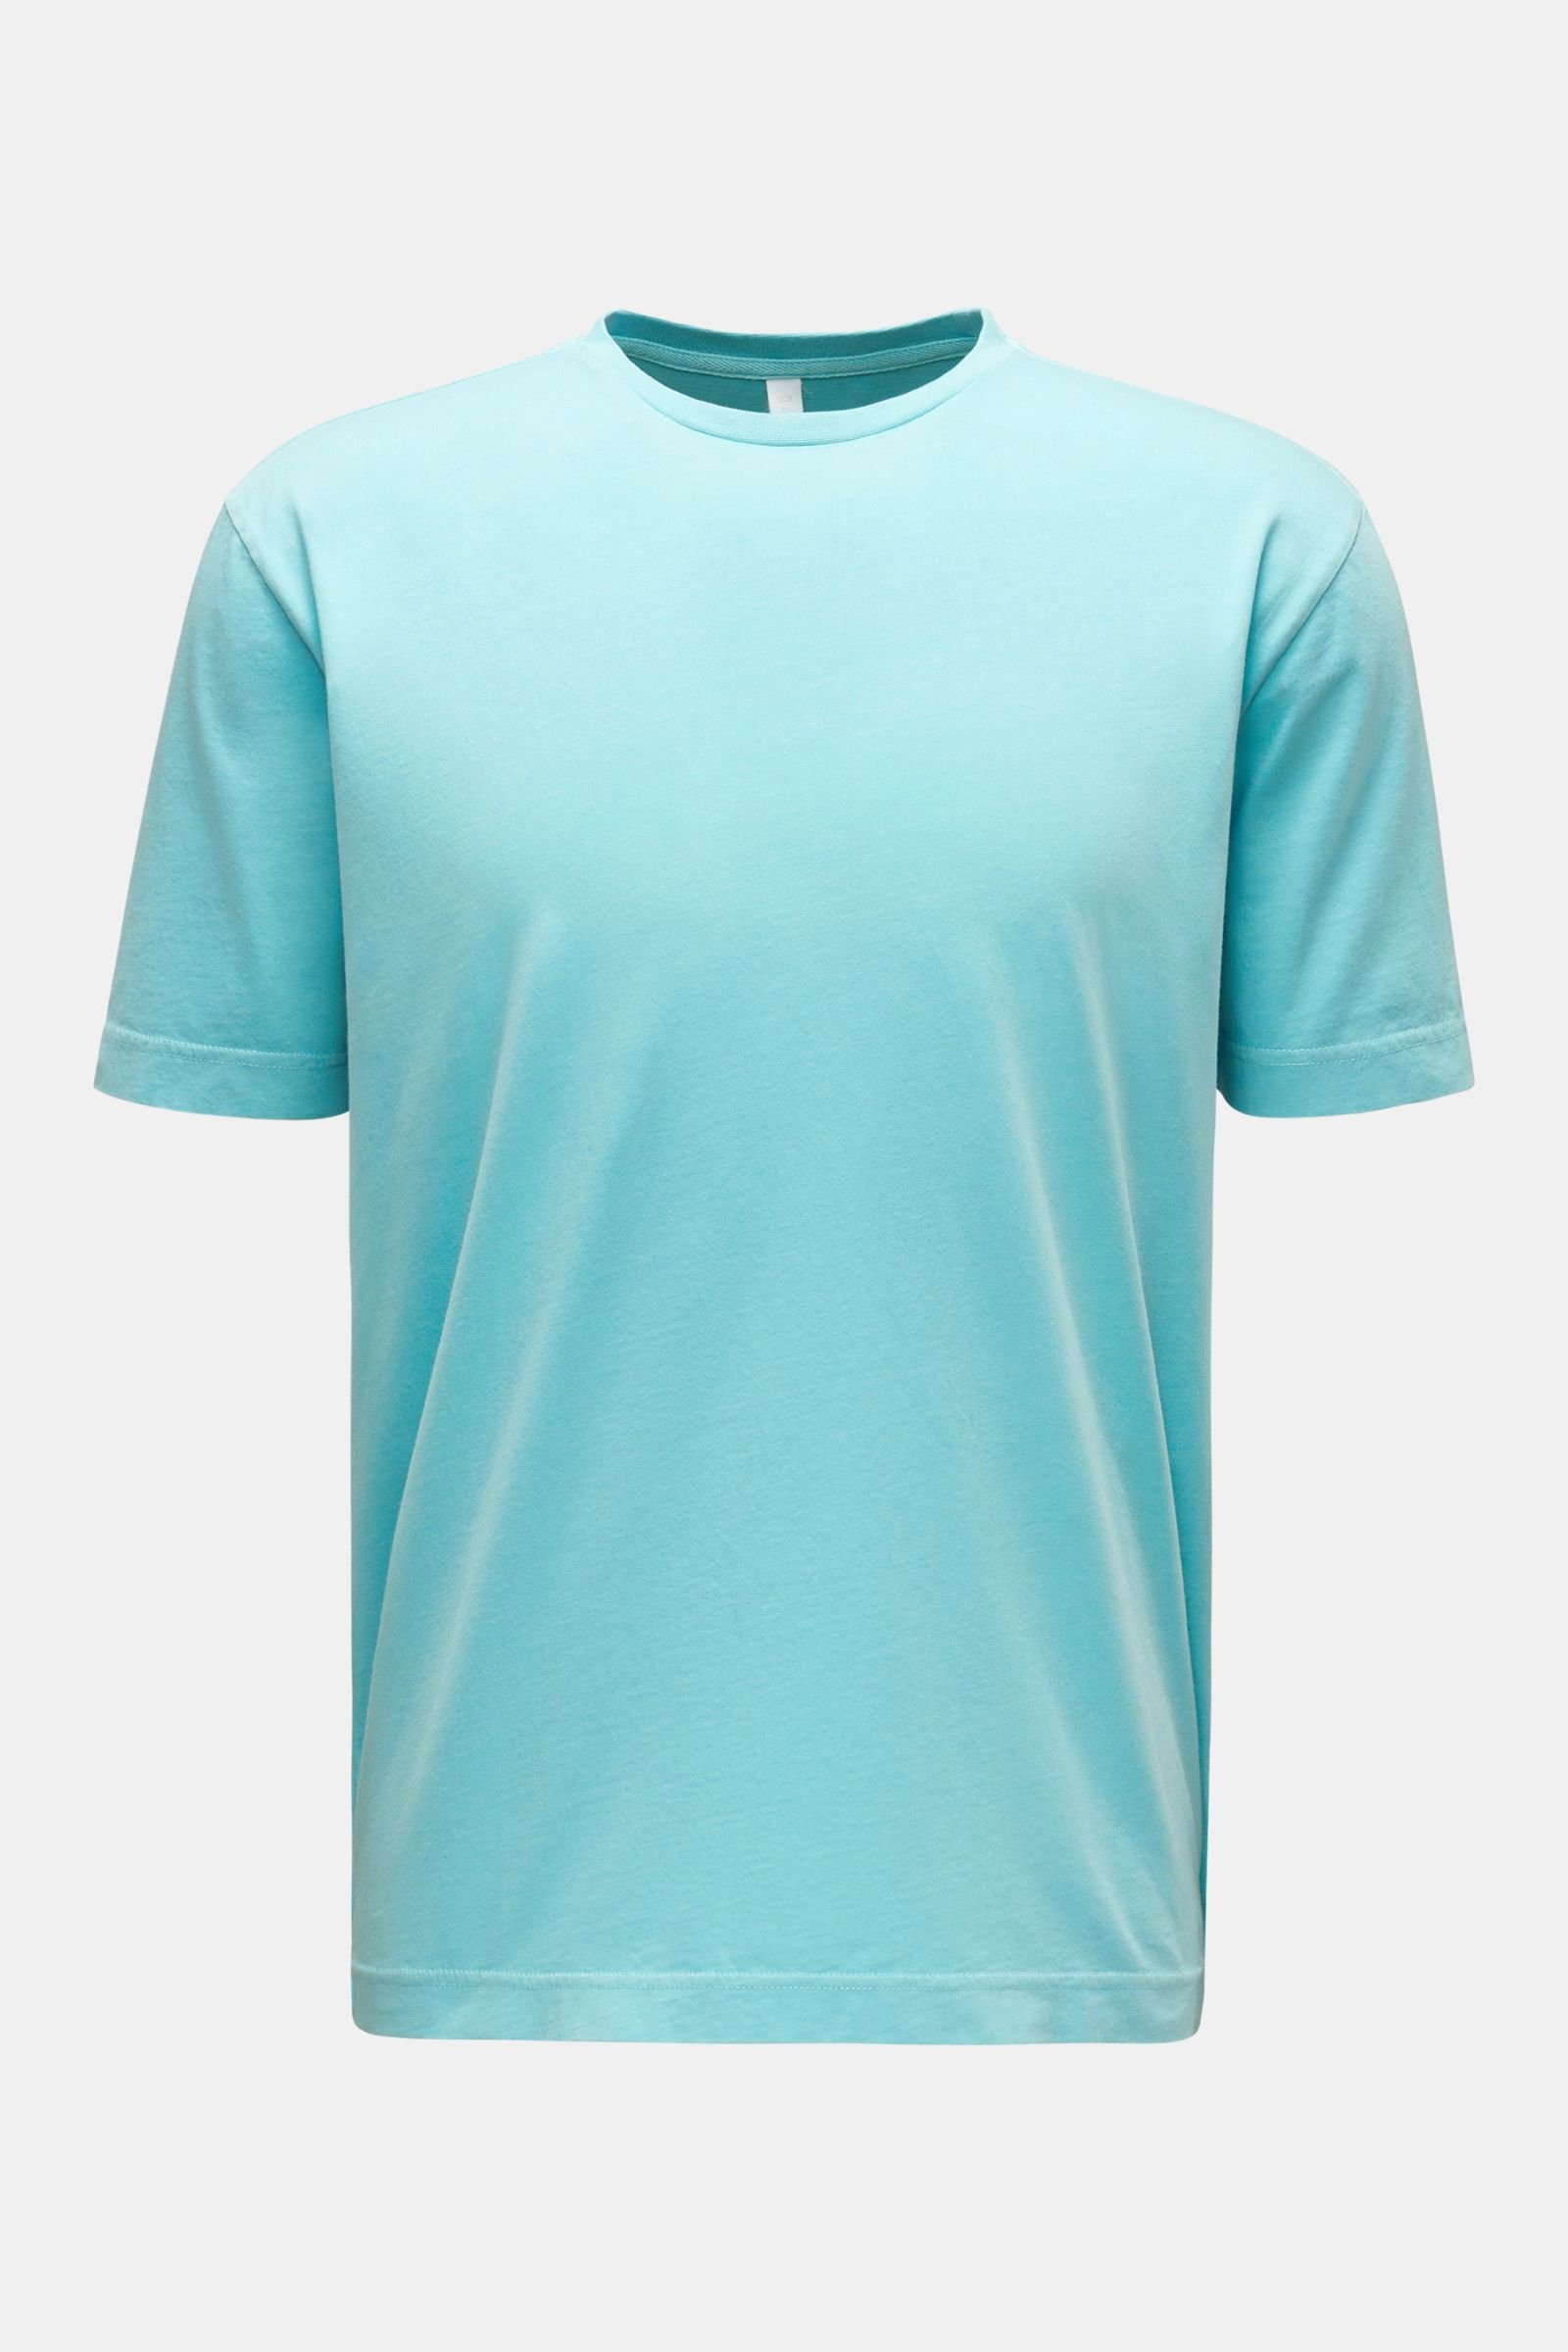 Crew neck T-shirt 'Jersey Tee' turquoise